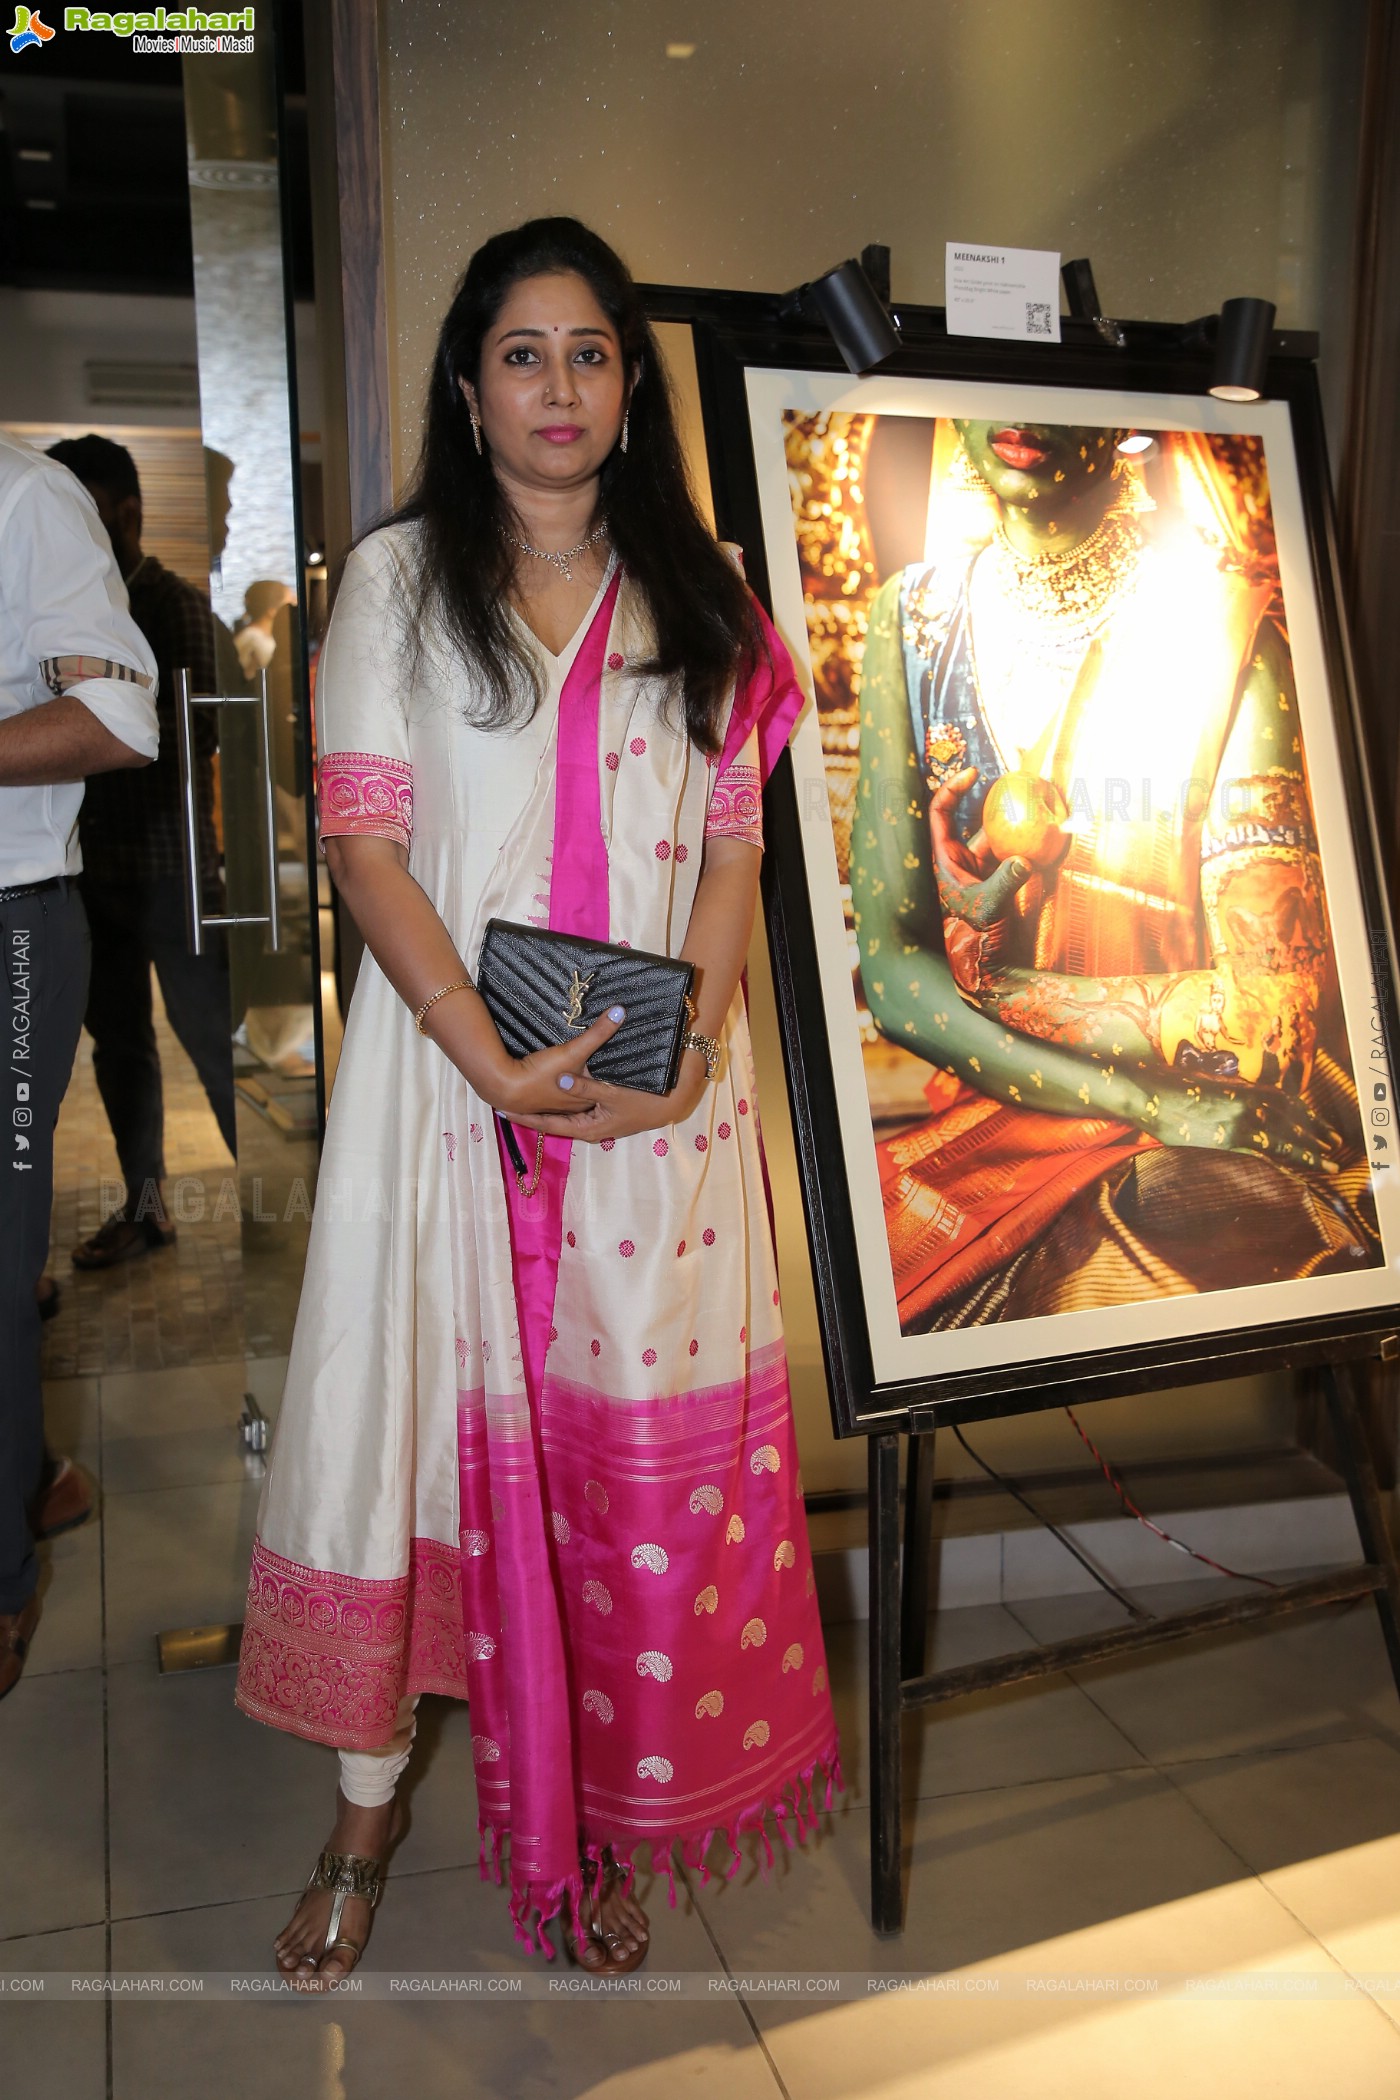 The Feminic Book Launch and Art Show by AVK